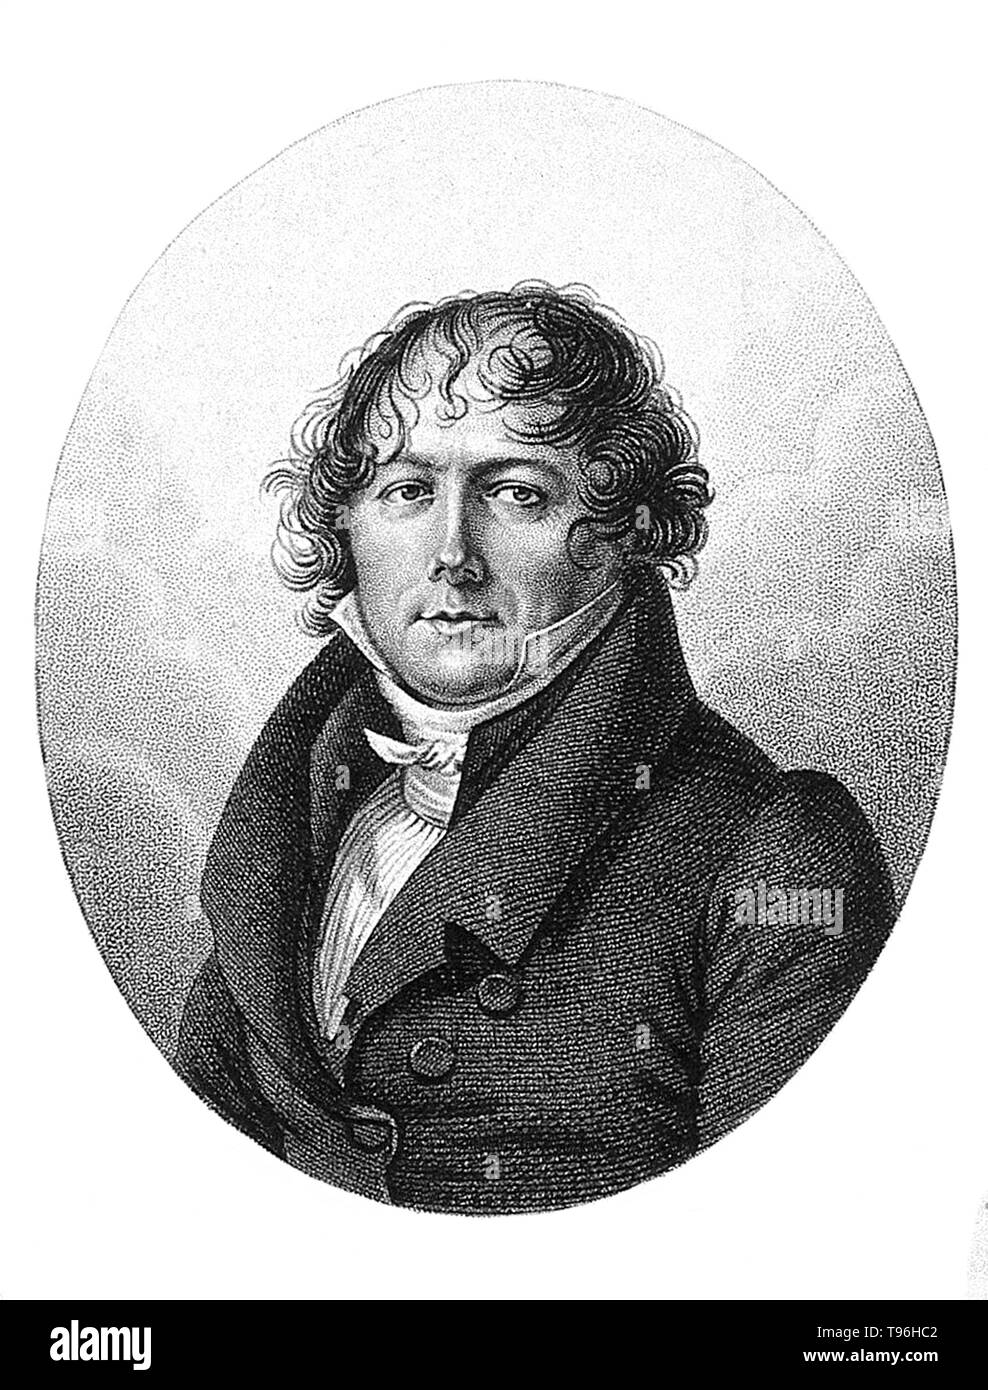 Jean-Baptiste Biot (April 21, 1774 -February 3, 1862) was a French  physicist, astronomer, and mathematician who established the reality of  meteorites, made an early balloon flight, and studied the polarization of  light.